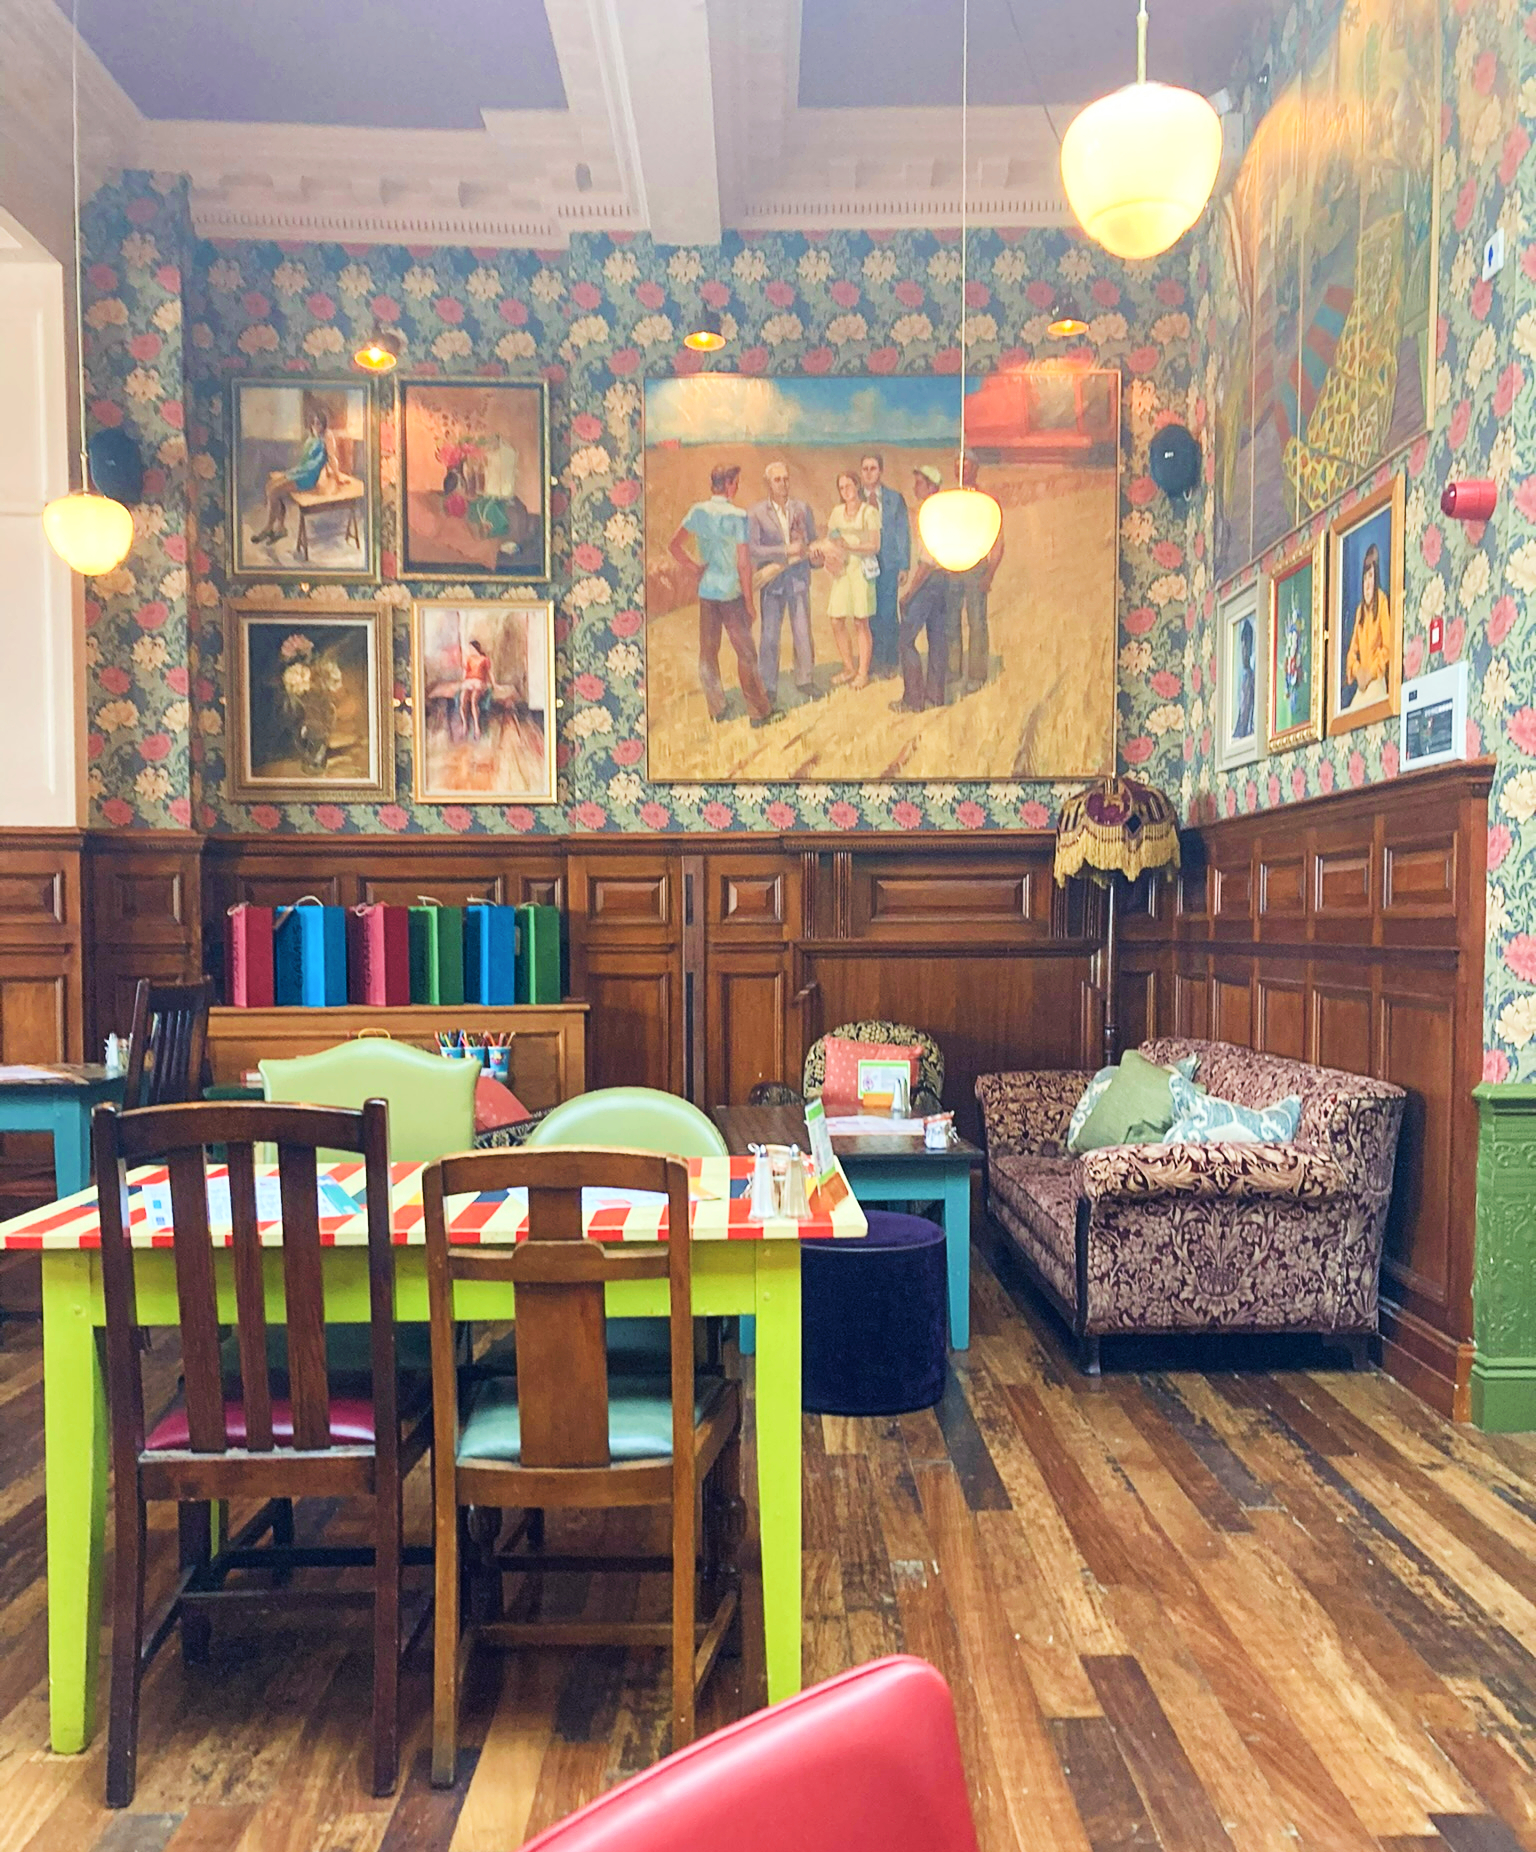 A glimpse inside the Morro Lounge with a riot of colours and artworks in the old bank chamber